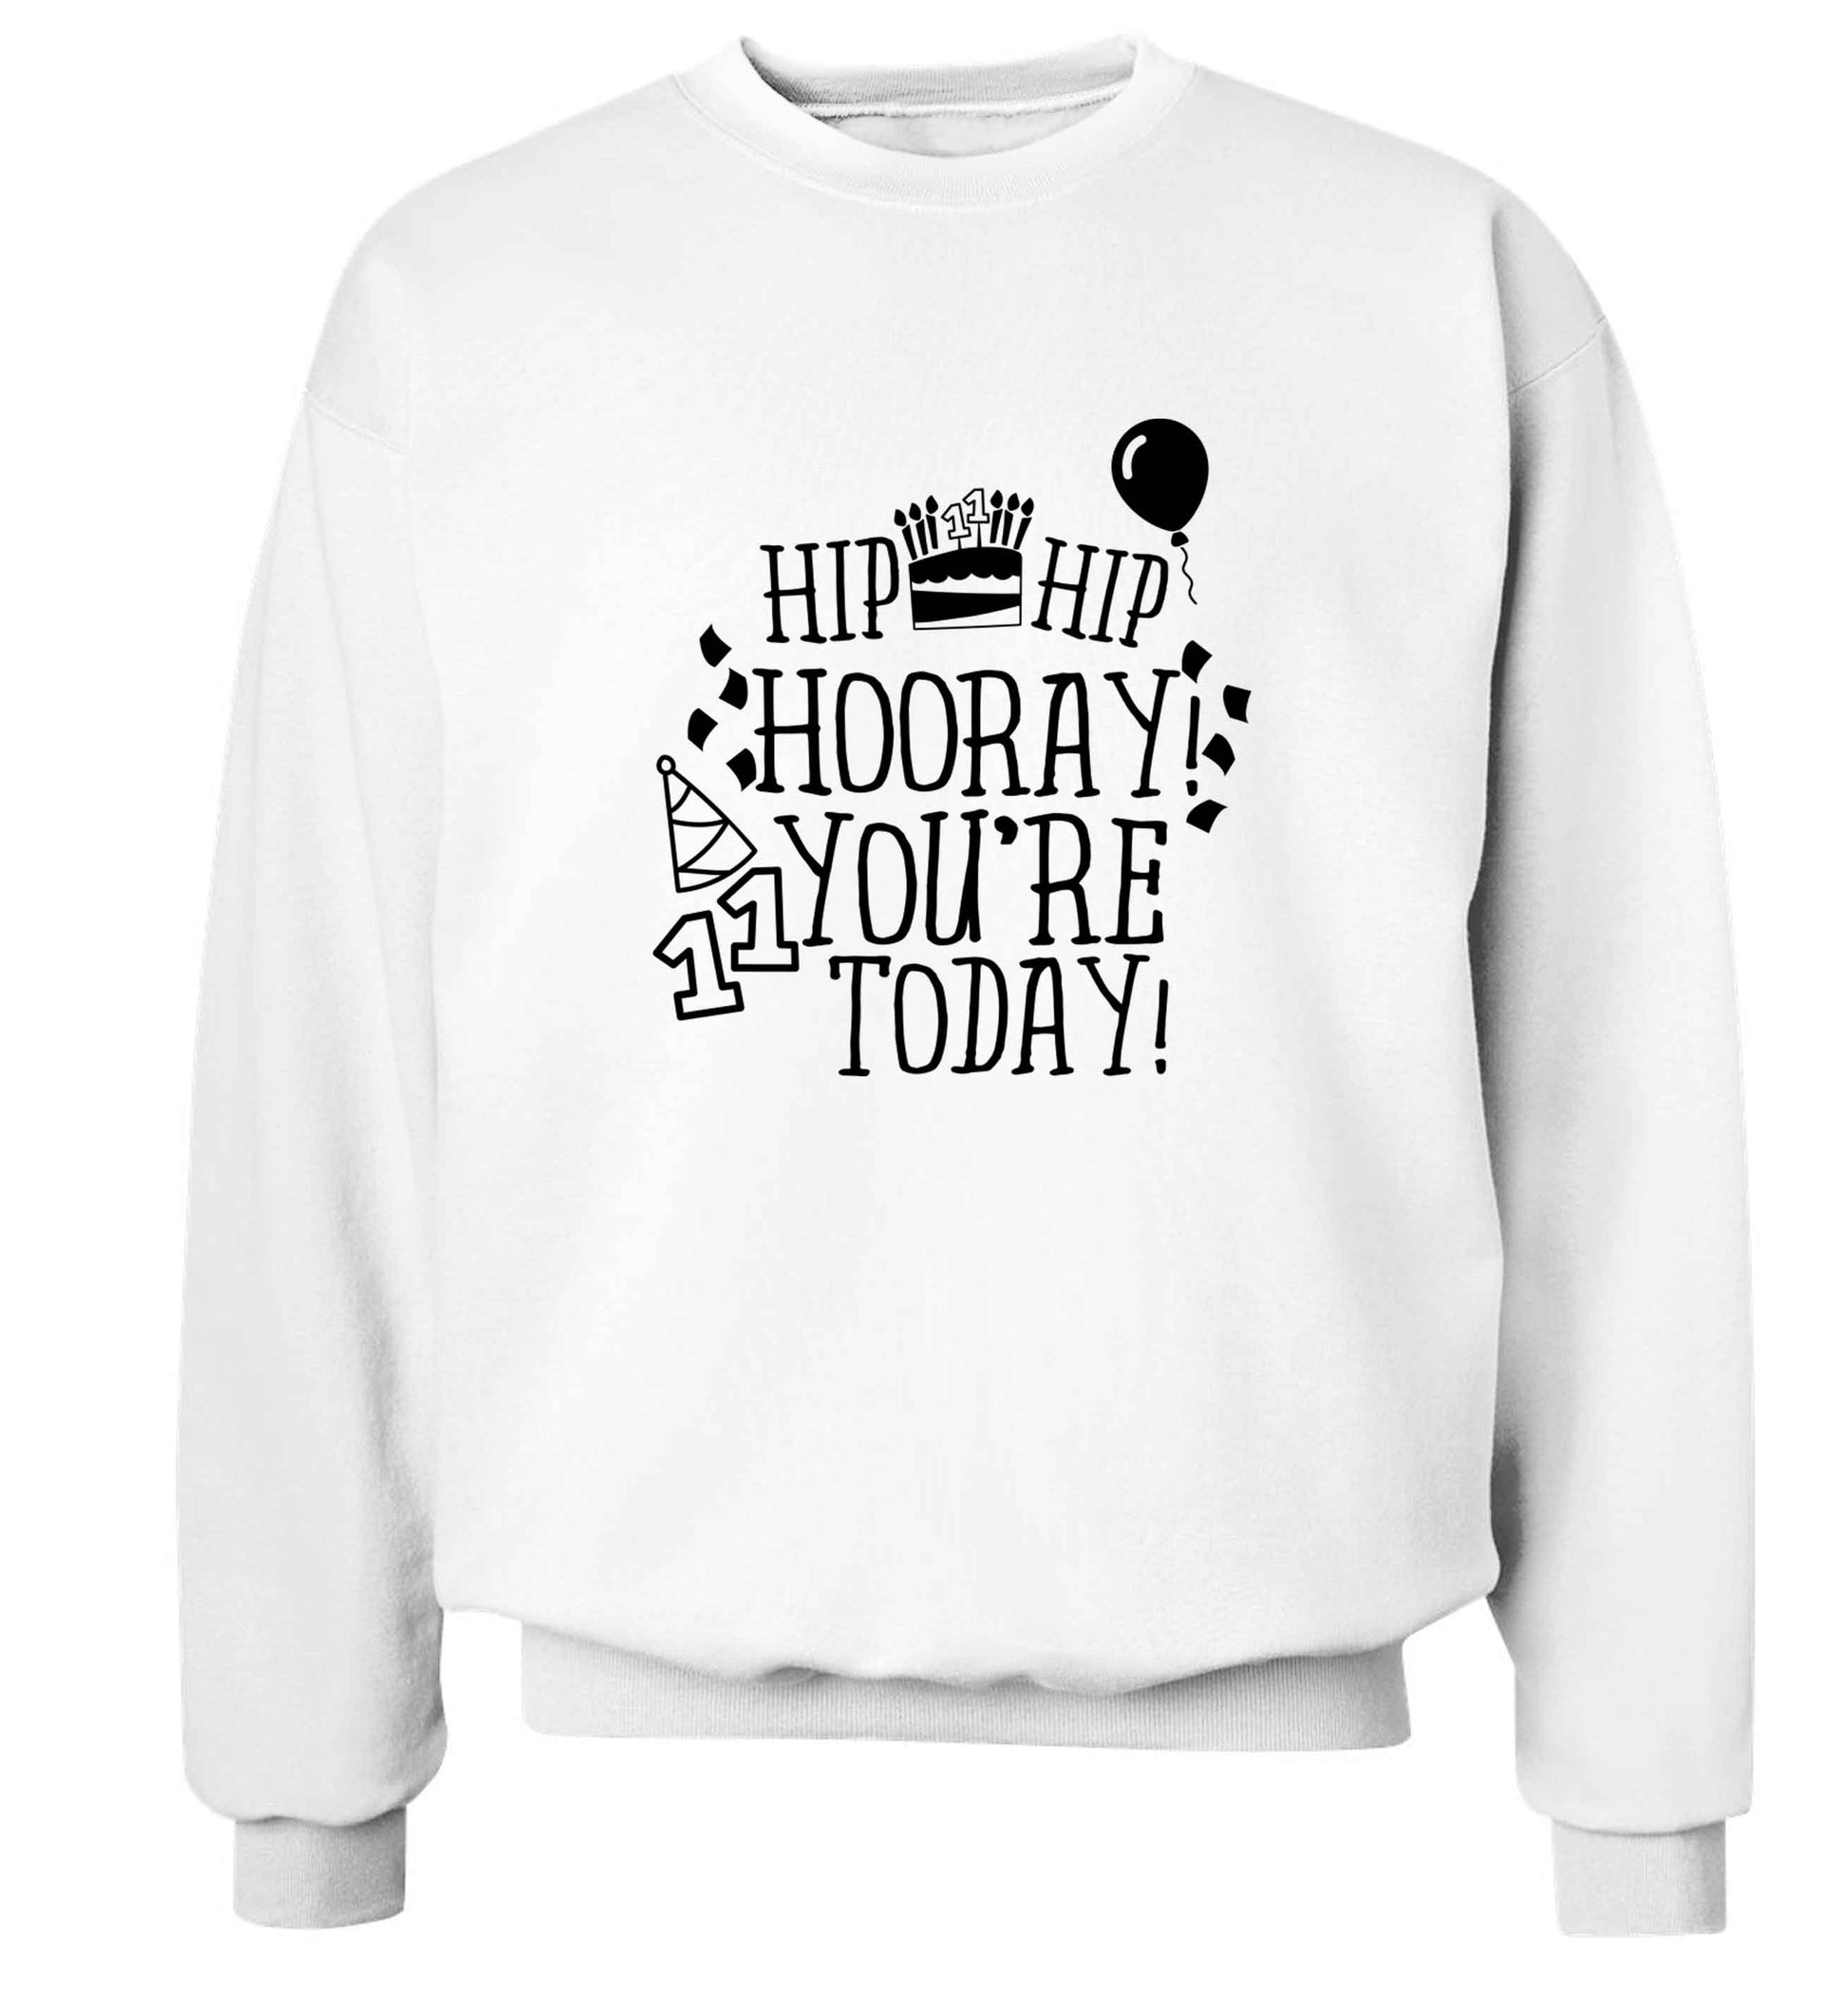 Hip hip hooray I you're eleven today! adult's unisex white sweater 2XL